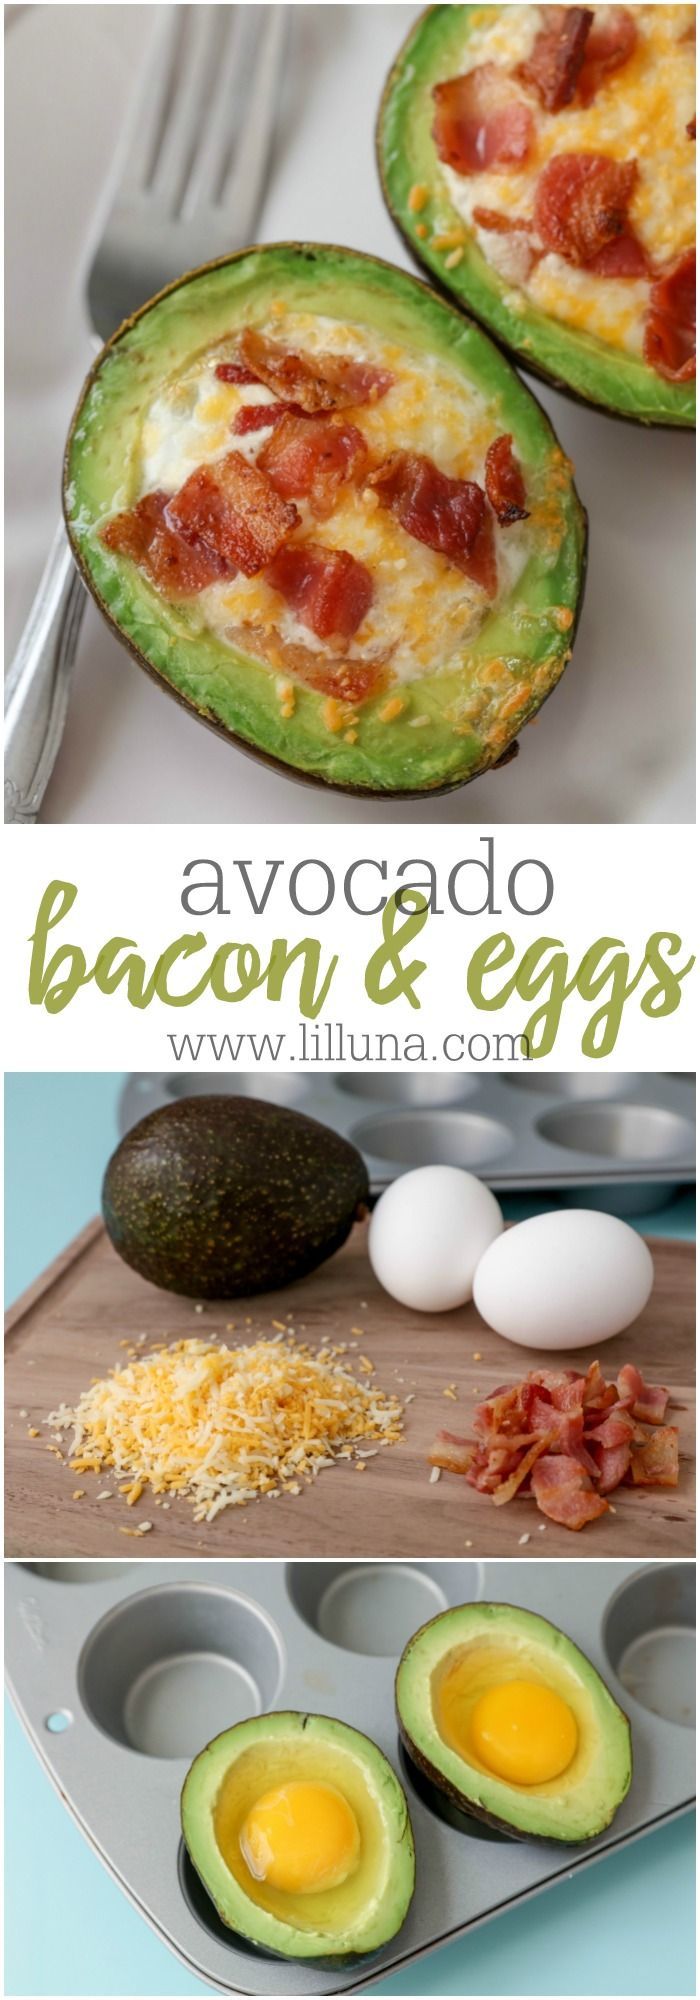 Avocado Bacon and eggs – one of our favorite breakfast recipes. Theyre topped